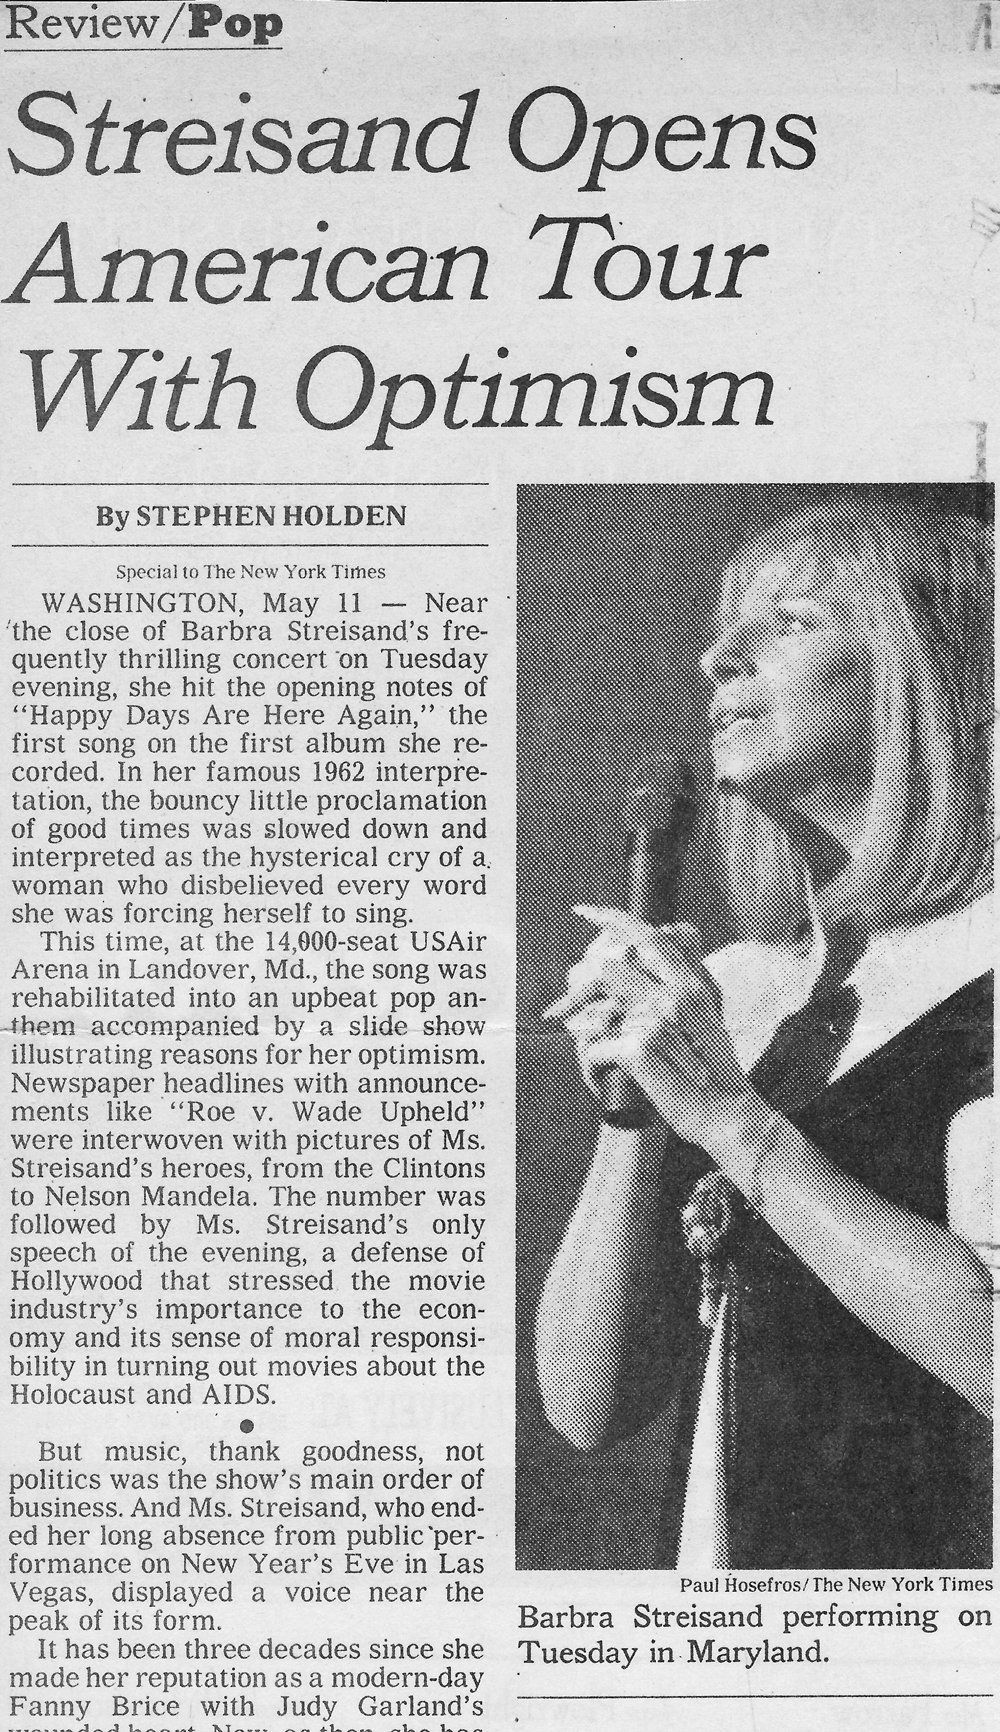 Review of Streisand's DC concert, 1994.